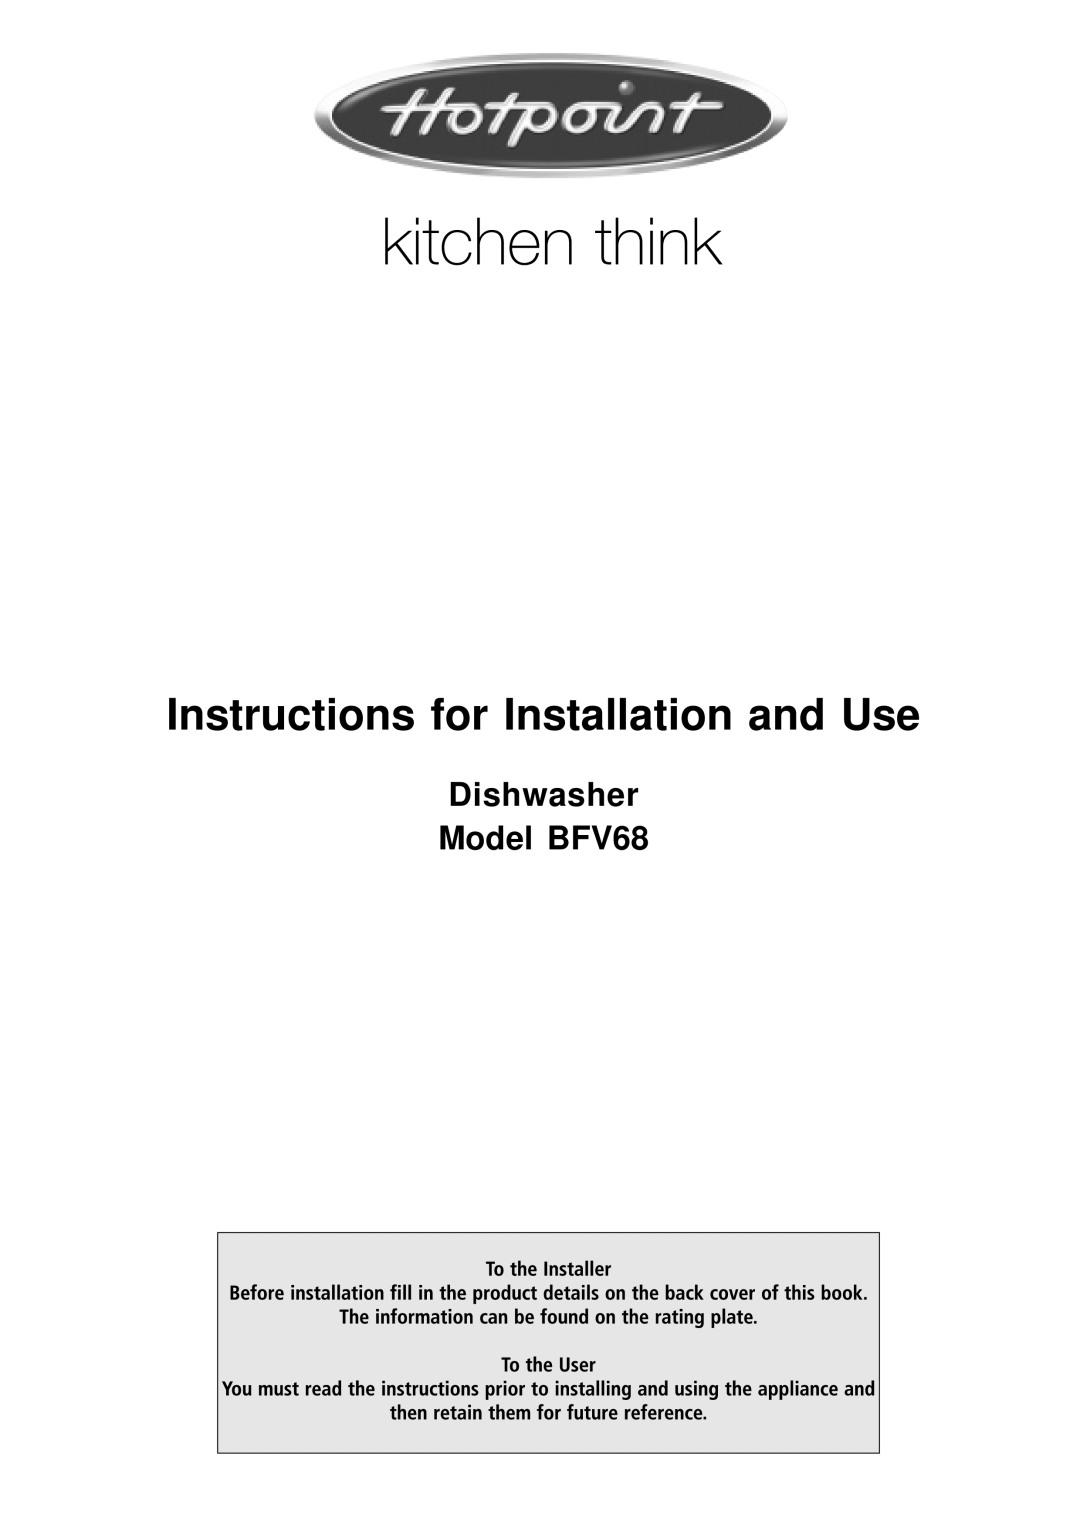 Hotpoint manual Instructions for Installation and Use, Dishwasher Model BFV68 